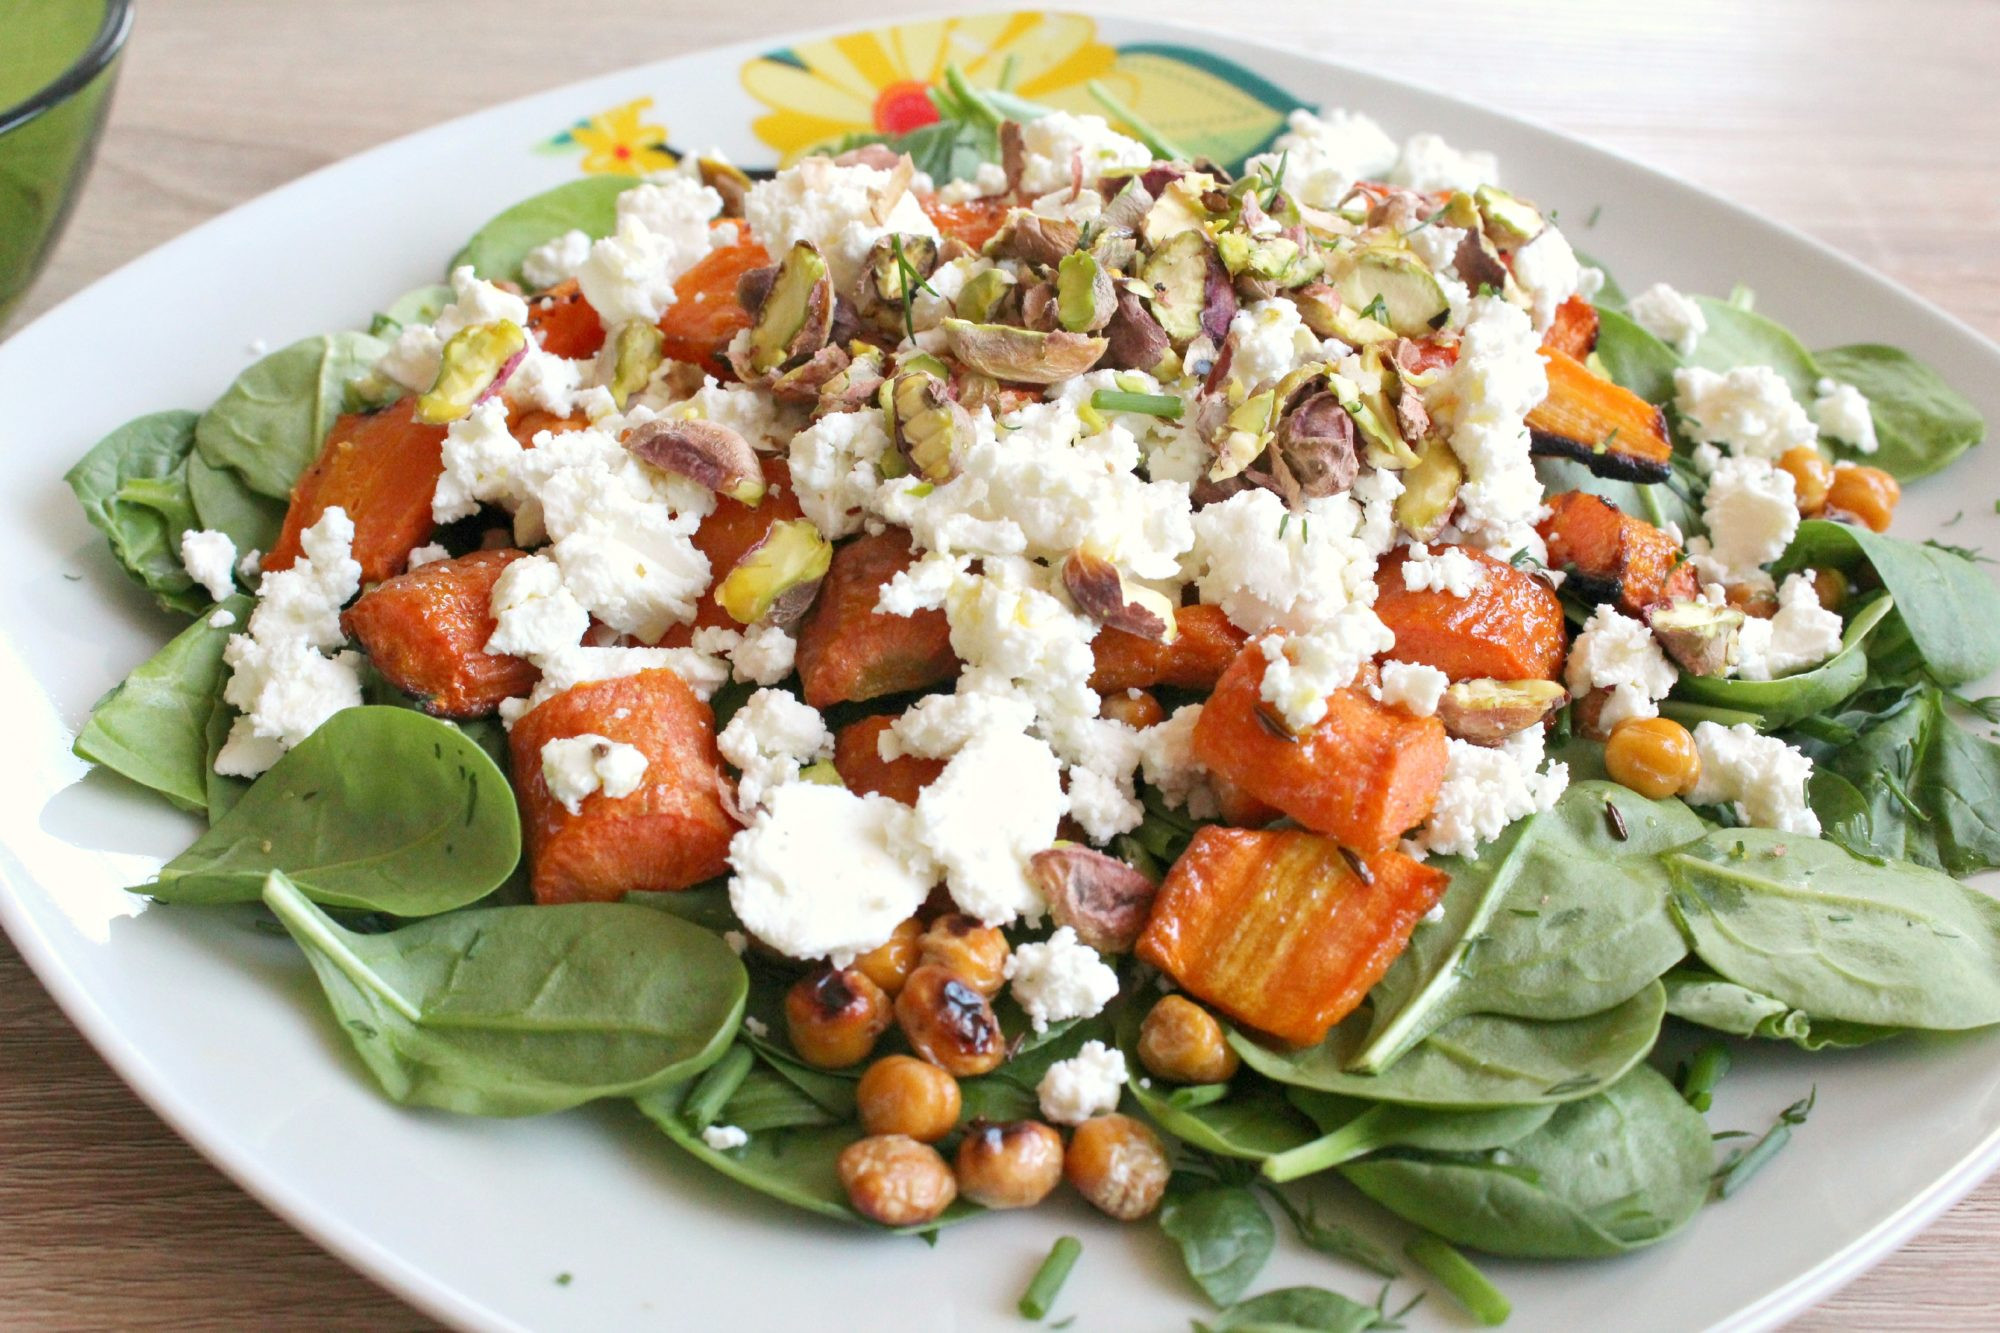 Recipes For Baby Spinach
 Baby spinach salad with roasted carrots feta & pistachios